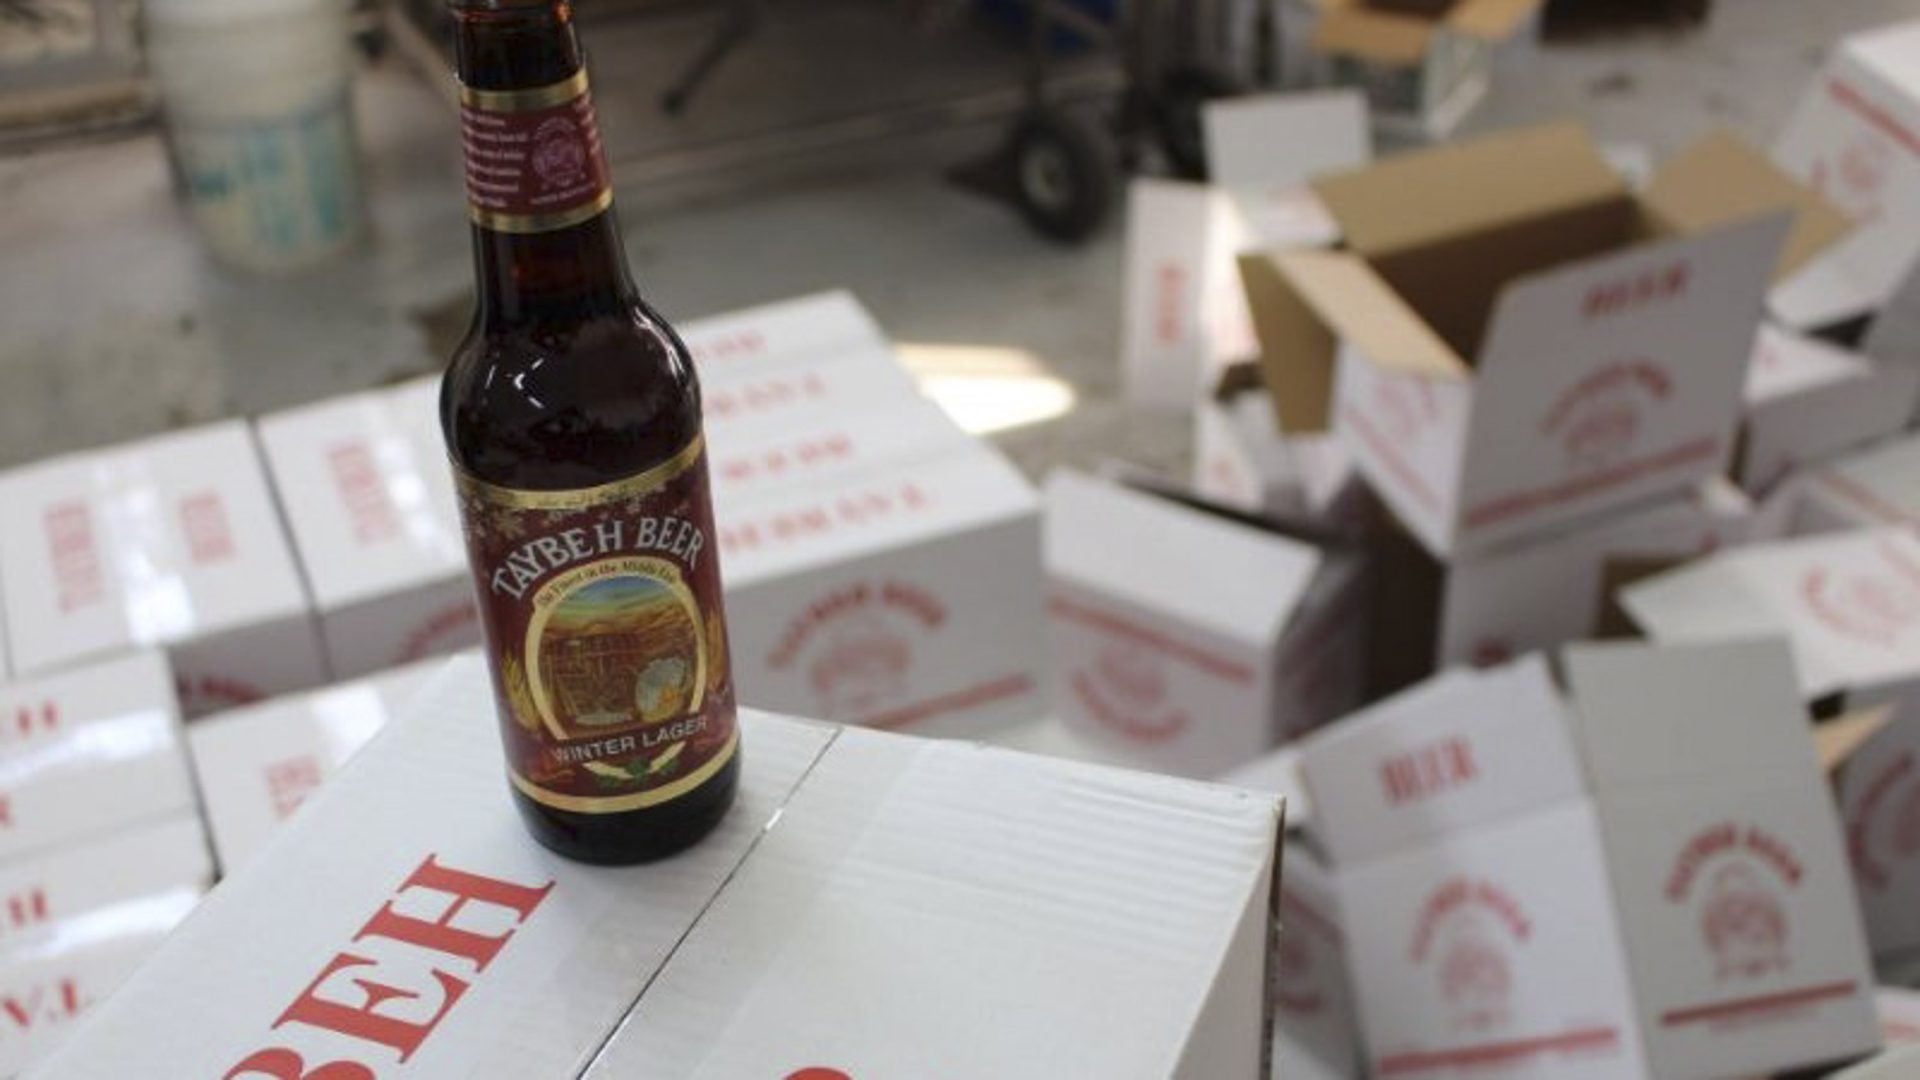 A bottle of beer stands on some boxes containing beer.